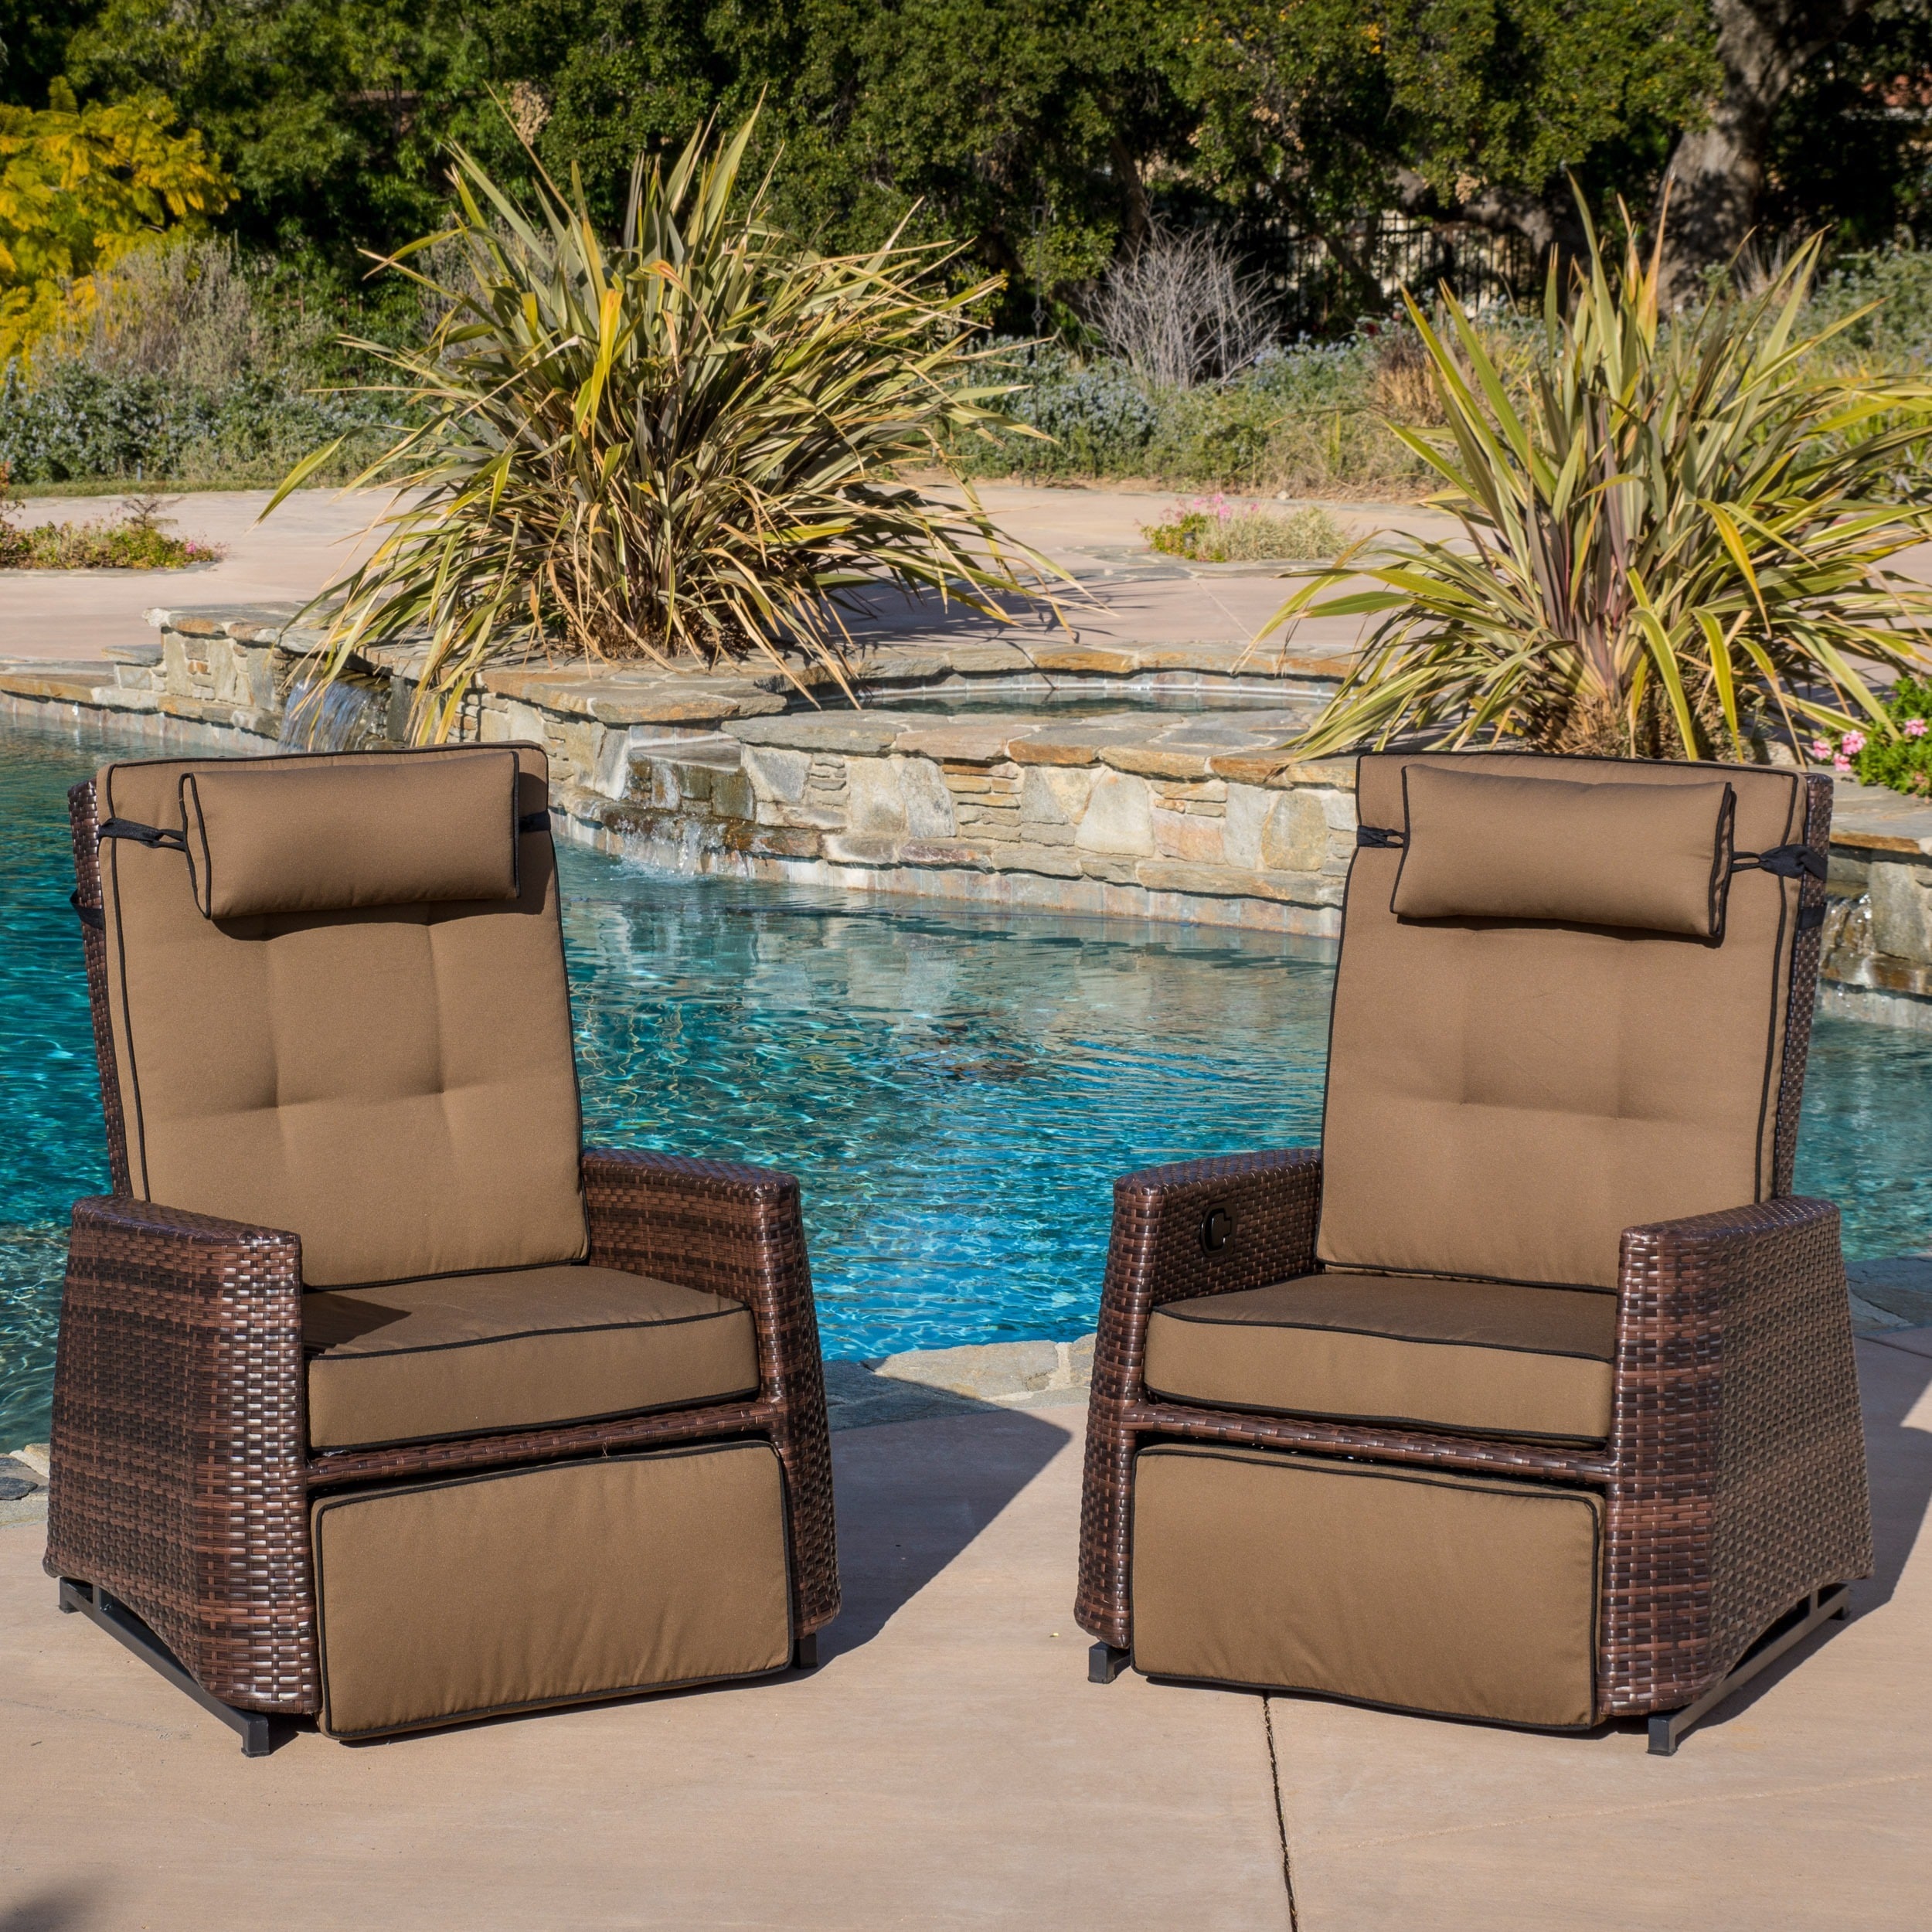 Christopher Knight Home Outdoor Brown Wicker Recliners (set Of 2) (BrownMaterials Aluminum frame / PE wickerCushions included Seat, back, and head rest cushion all includedWeather resistant YesUV protection YesAdjustable legs/back YesDimensions 43.2